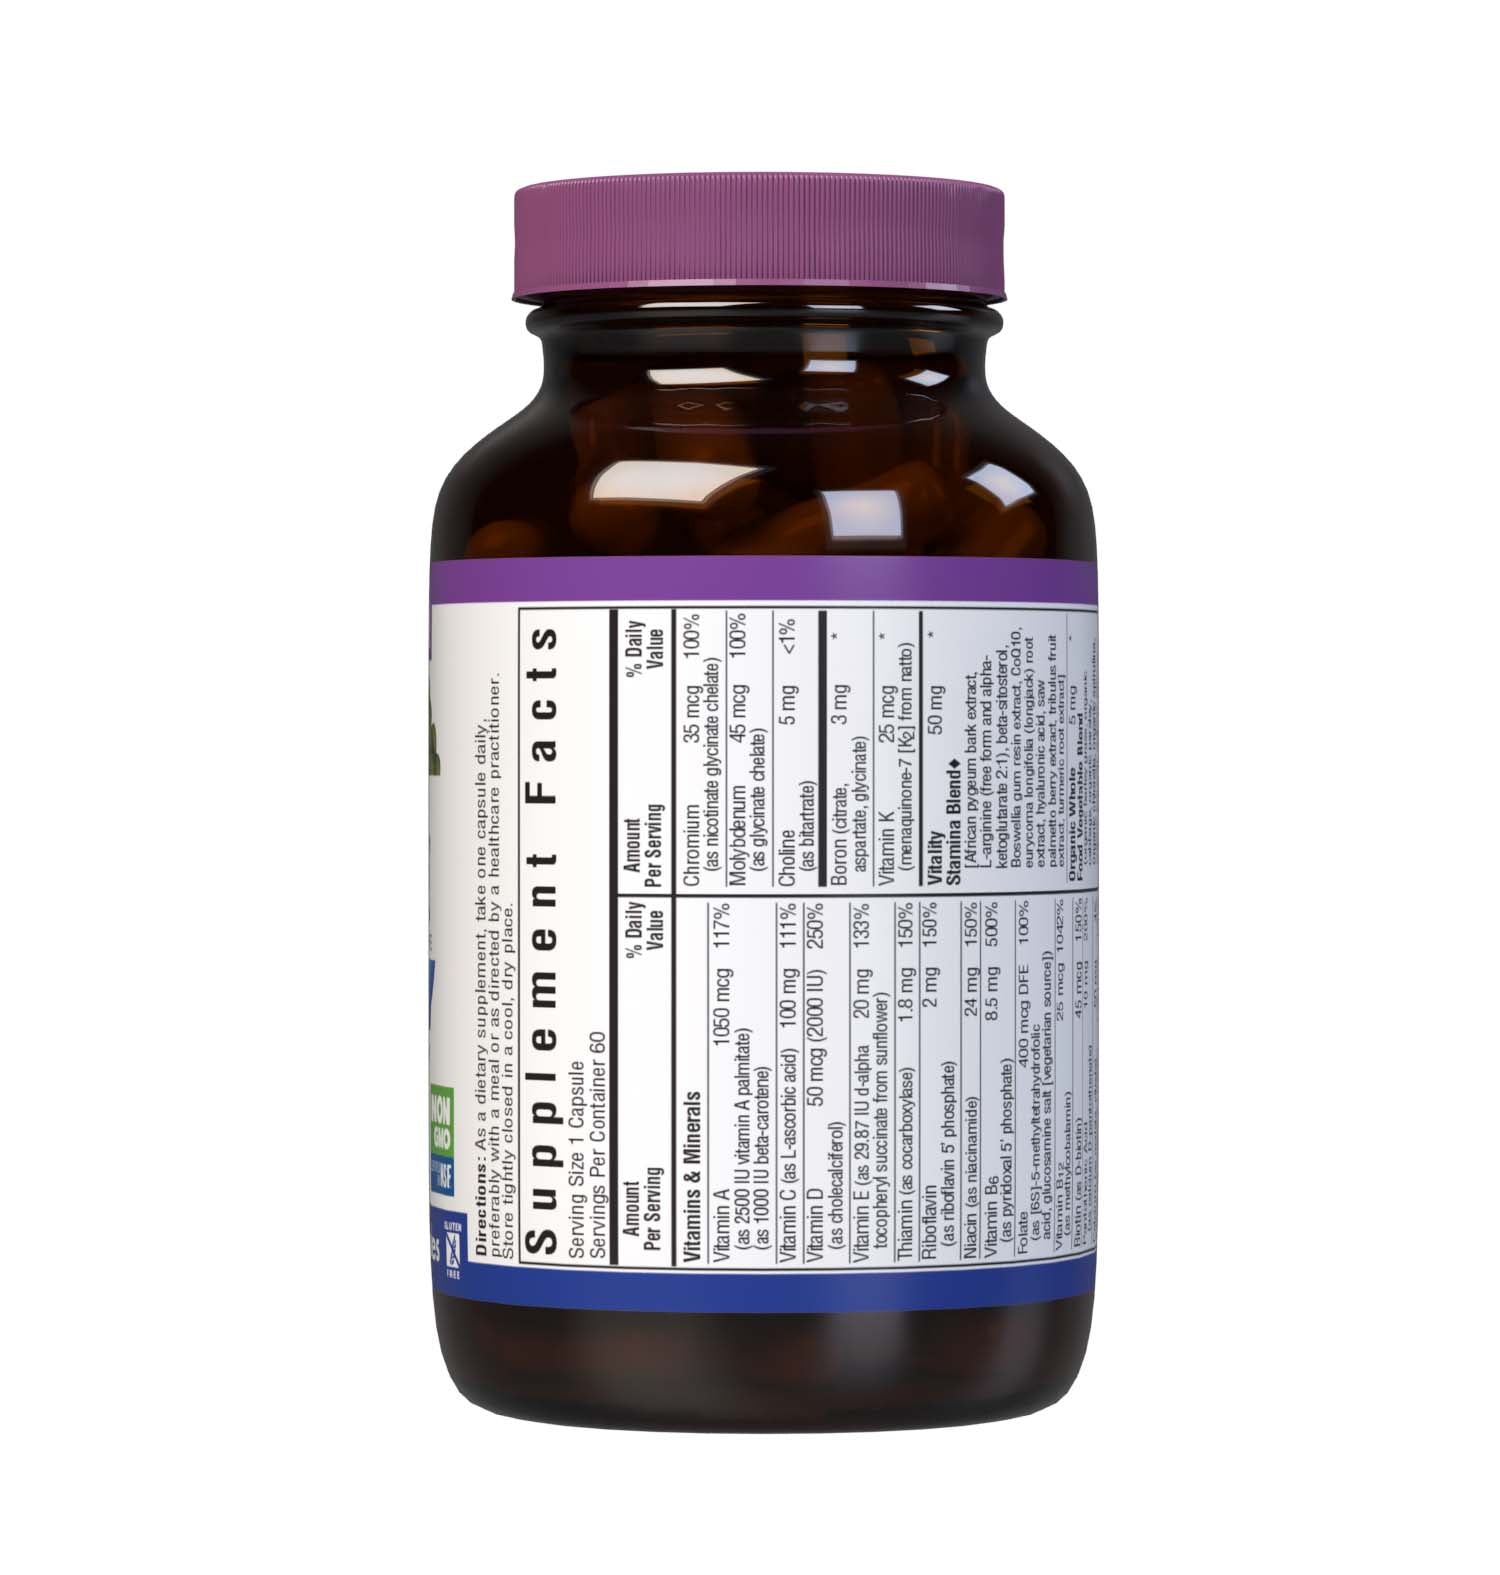 Bluebonnet’s Men’s ONE 40+ Whole Food-Based Multiple 60 Vegetable Capsules are formulated for daily nutritional support and vitality for men over 40, helping to increase energy and vitality, aid joint comfort, maintain prostate health, and support heart health. Supplement facts box panel top.#size_60 count